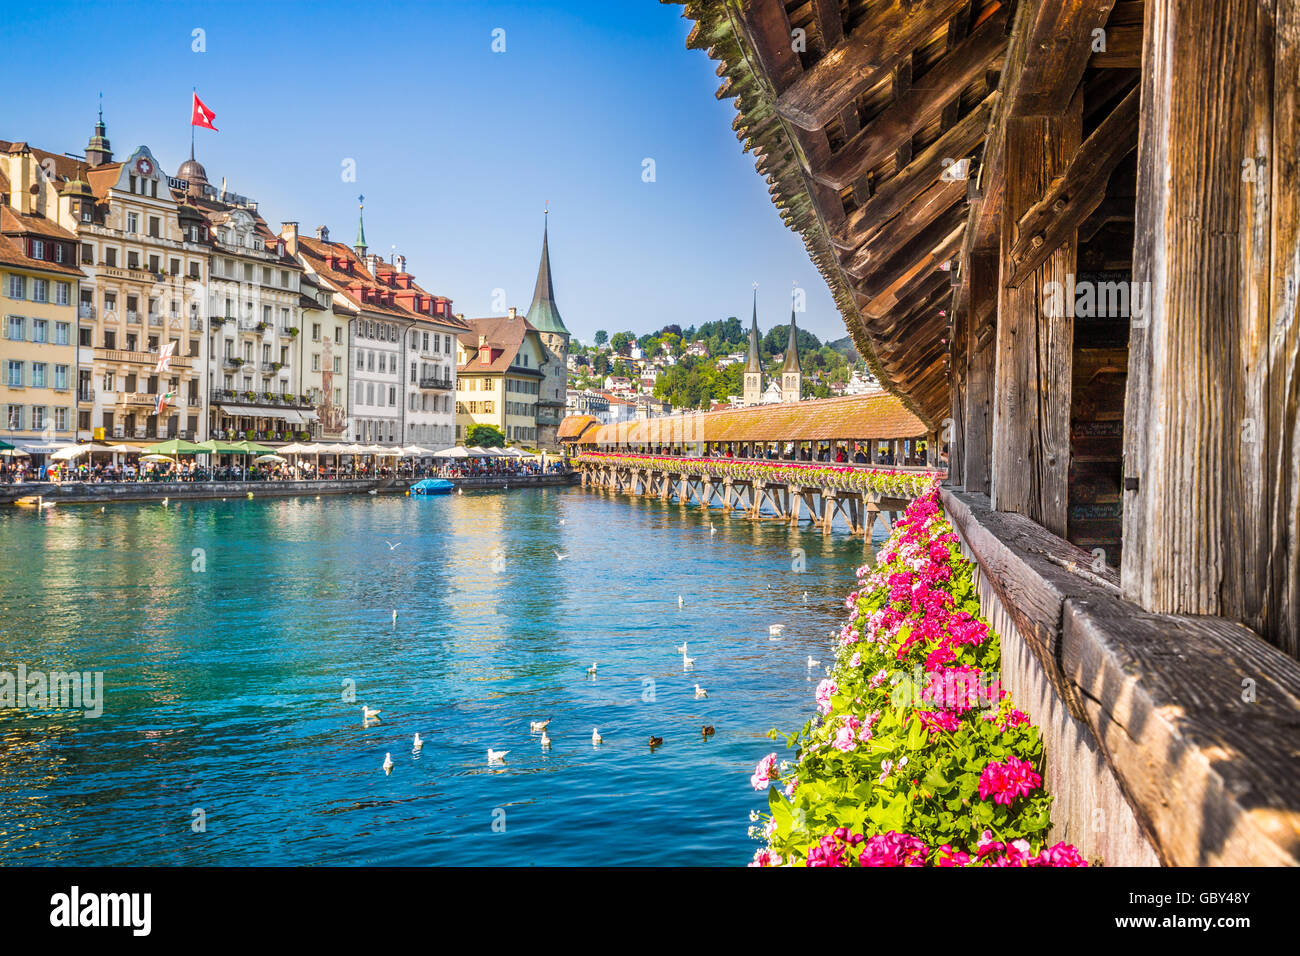 Famous Chapel Bridge in the historic city center of Lucerne, the city's symbol and one of Switzerland's main tourist attractions, Switzerland Stock Photo